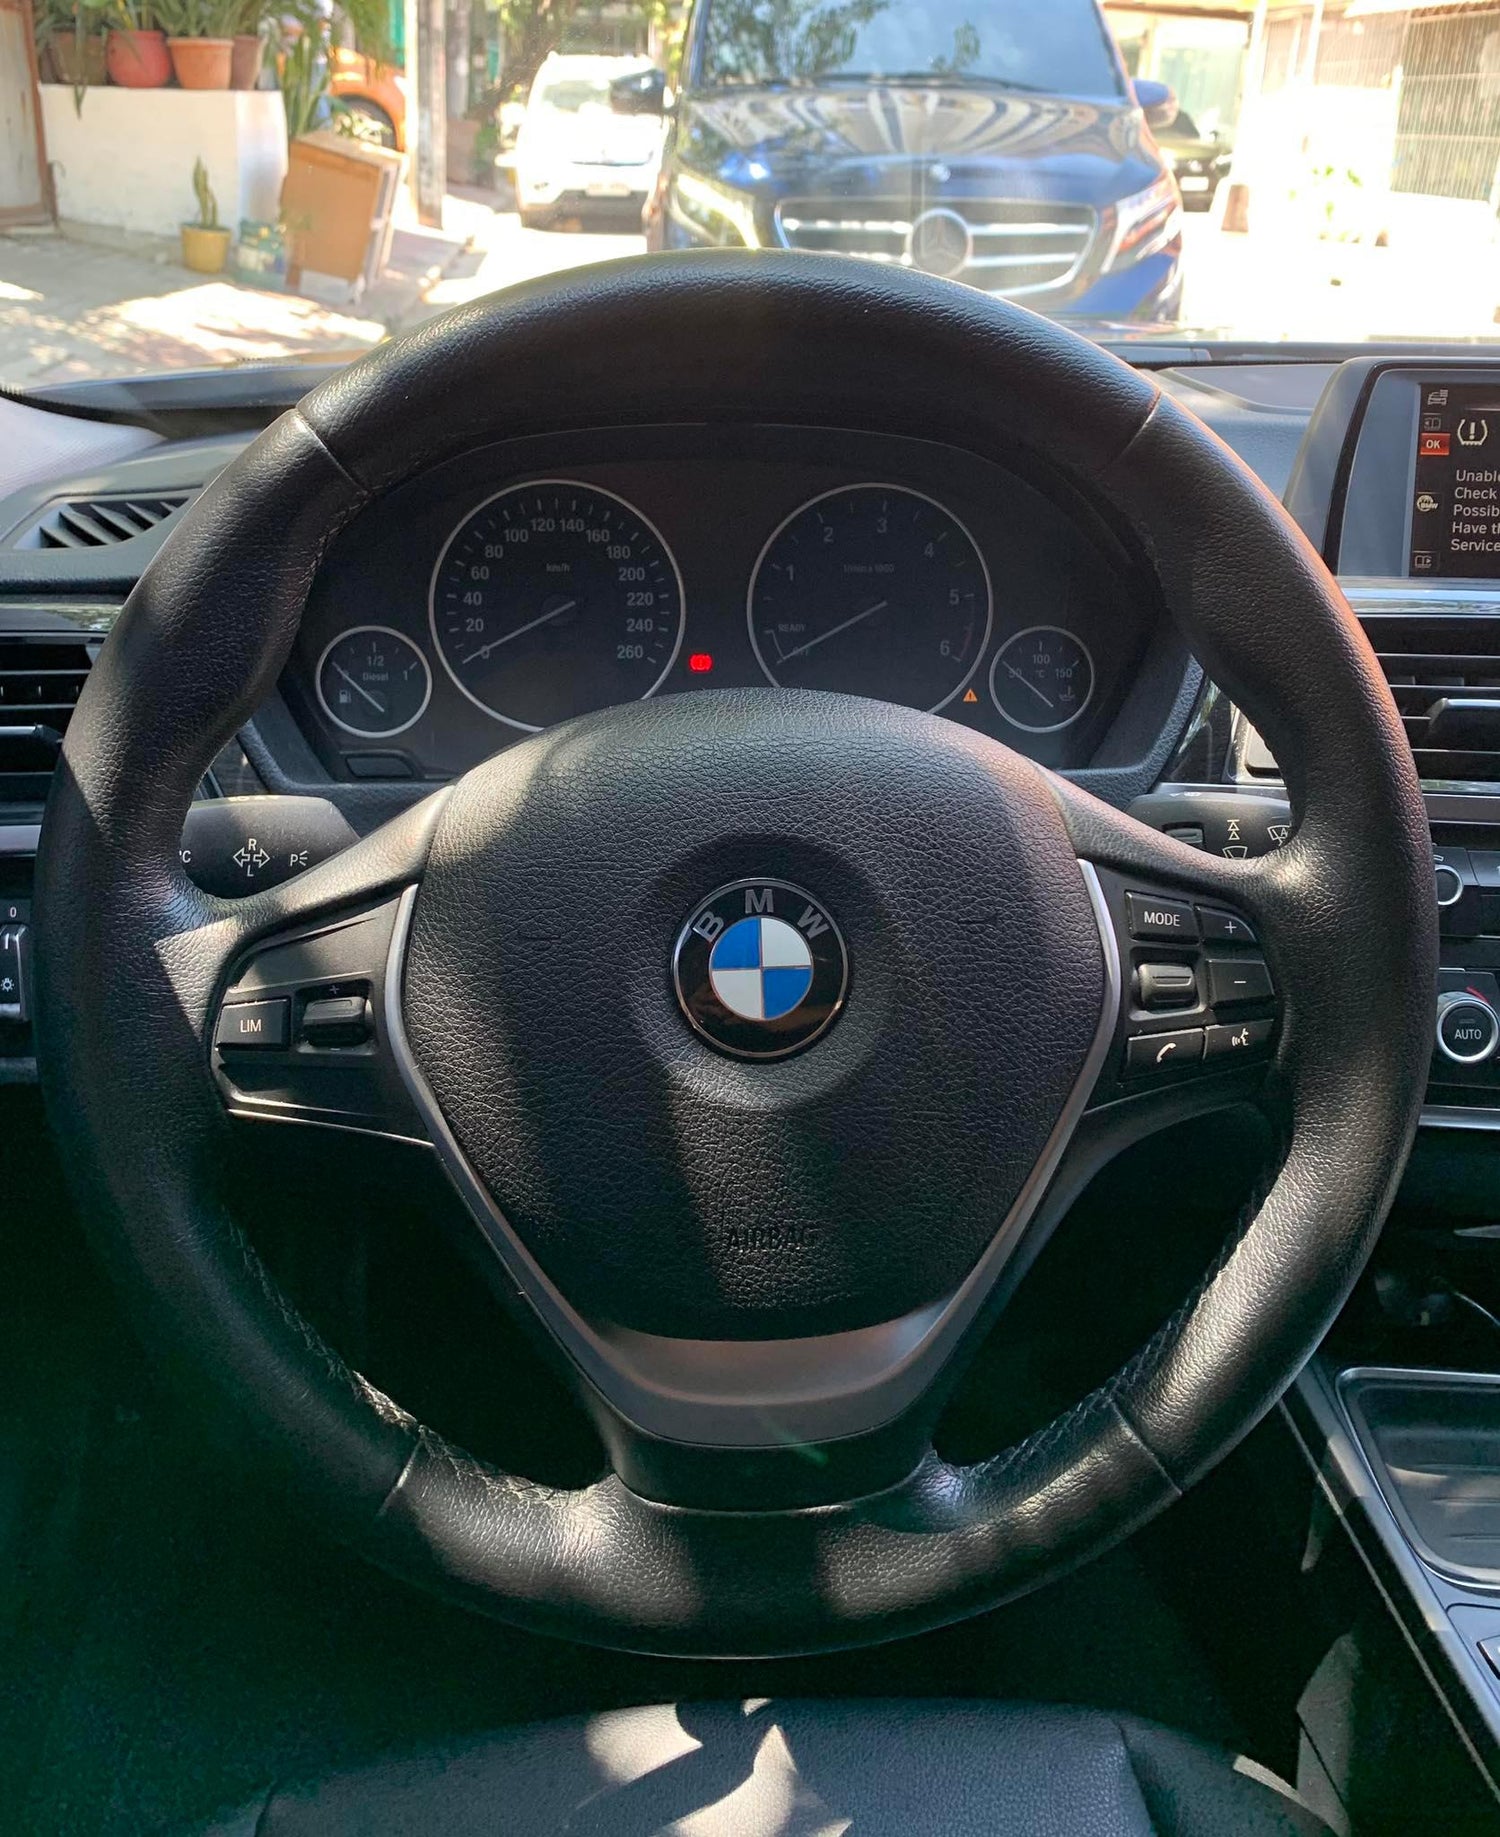 2016 BMW 320D LUXURY DIESEL AUTOMATIC TRANSMISSION | Secondhand Used Cars for Sale at Manila Auto Display.